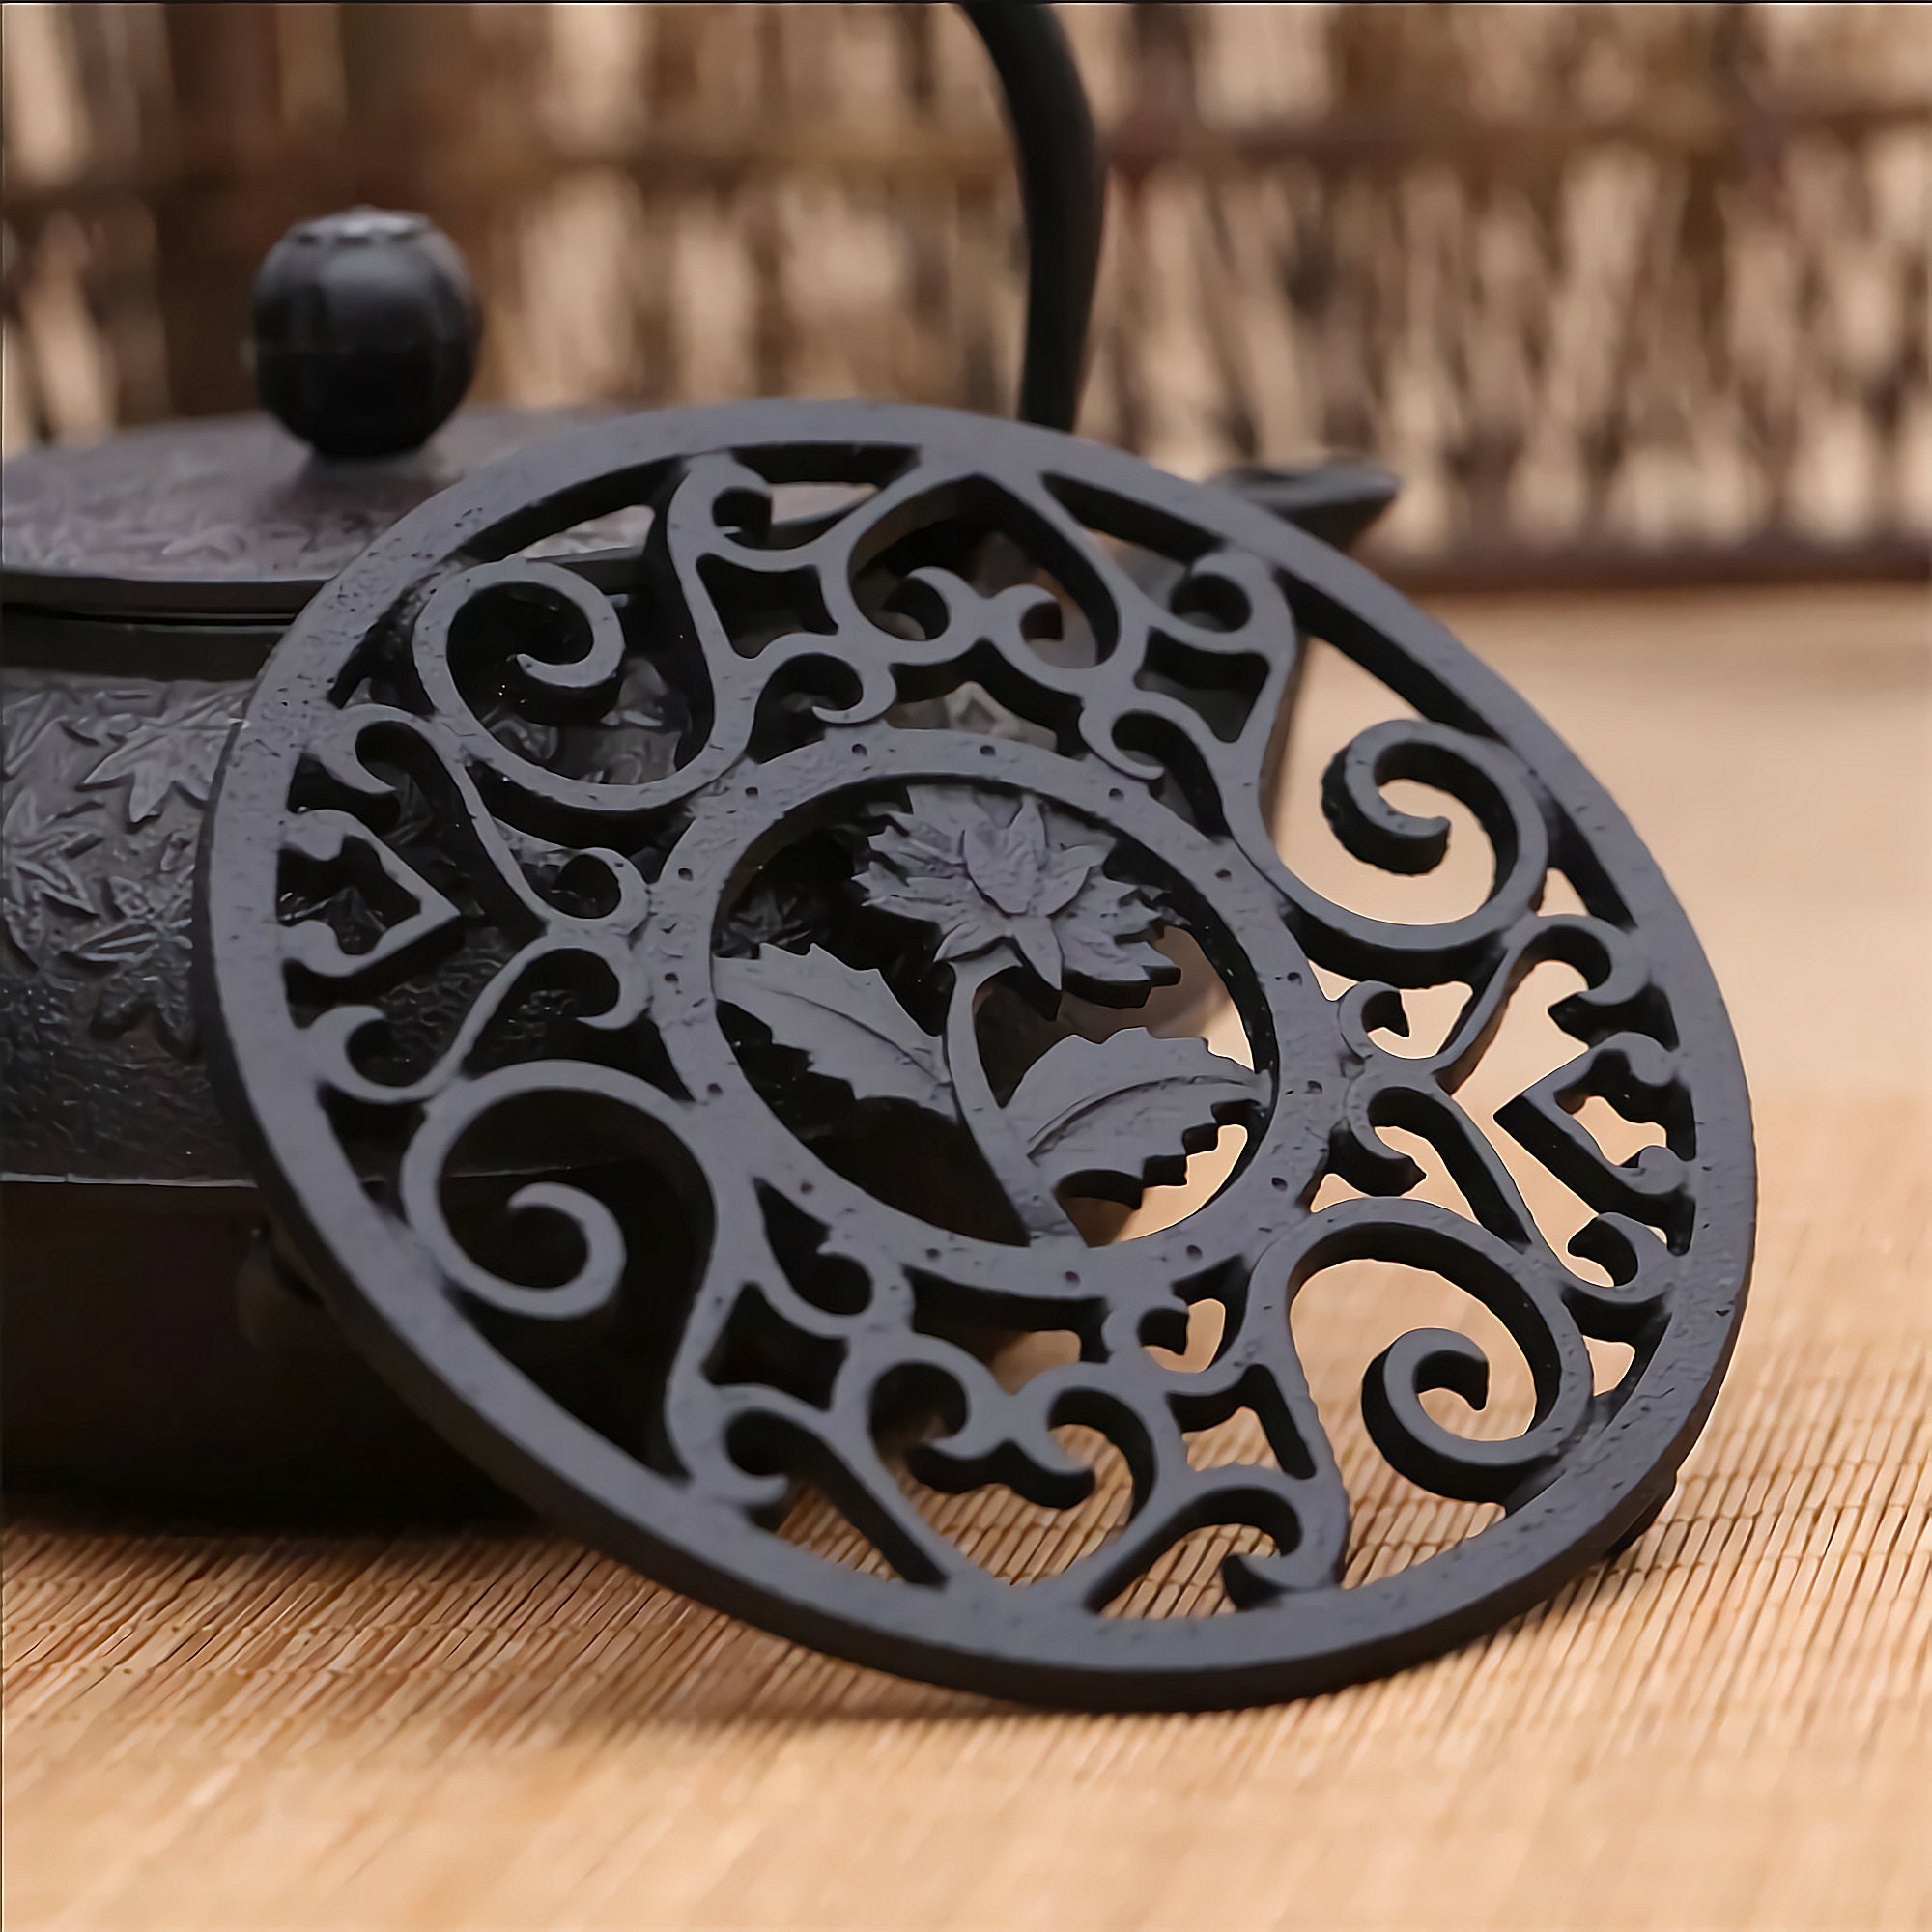 Cast Iron Trivet Rustic Style Antique Brown Finish Cat Face Shaped Pan Rest Hot  Pan Stand Hot Pan Holder Kitchen Worktop Protector 